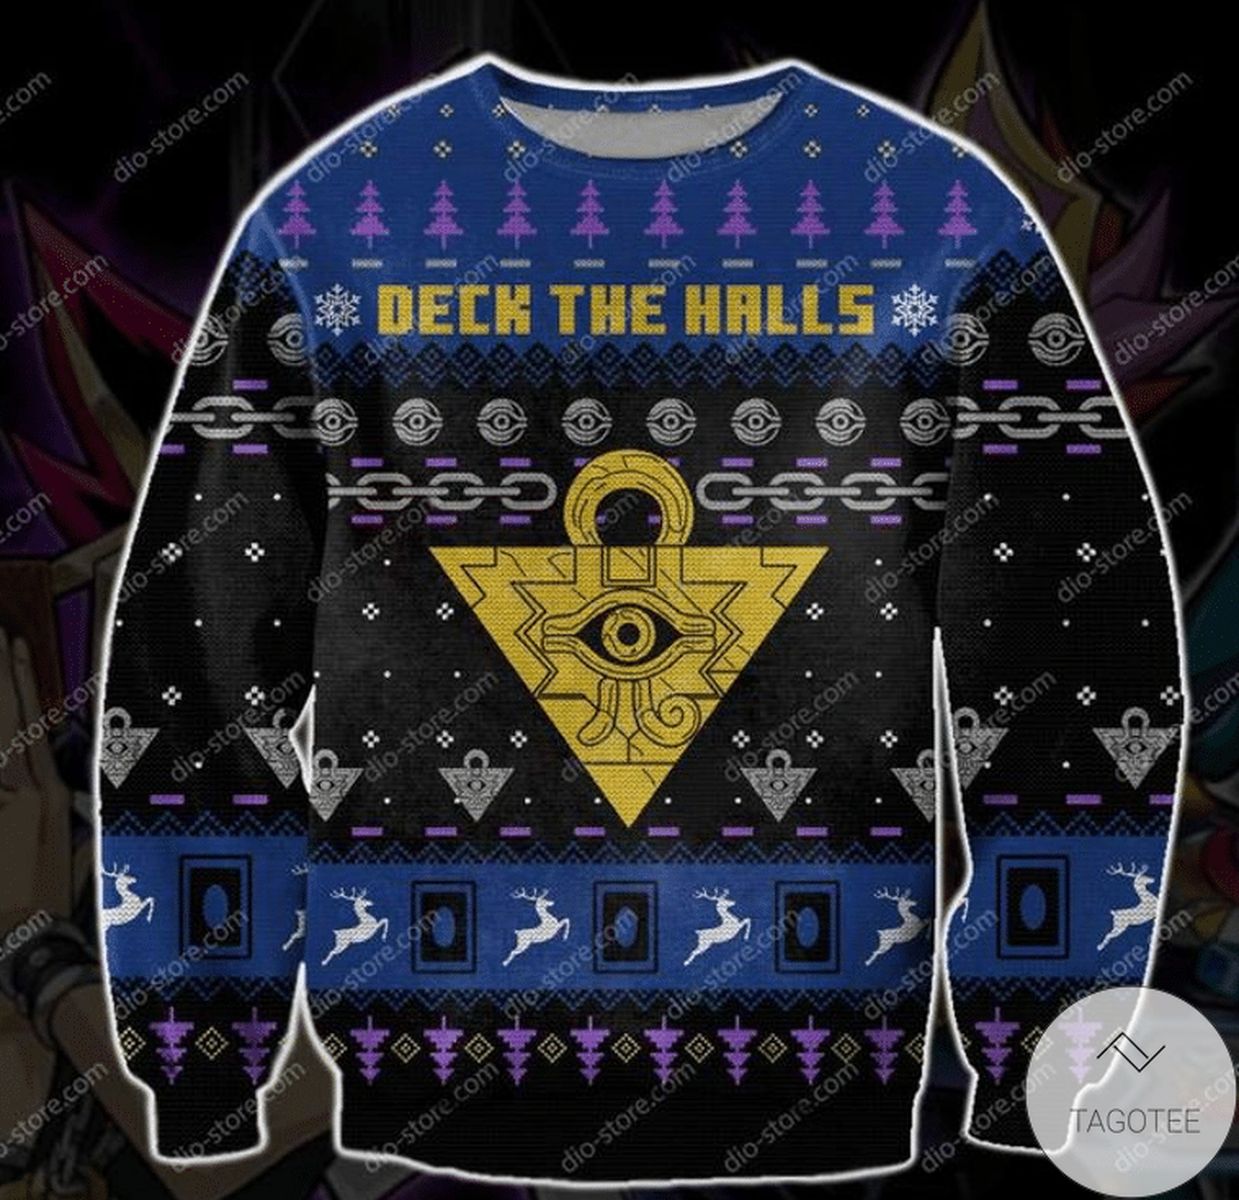 Deck The Halls Ugly Christmas Sweater